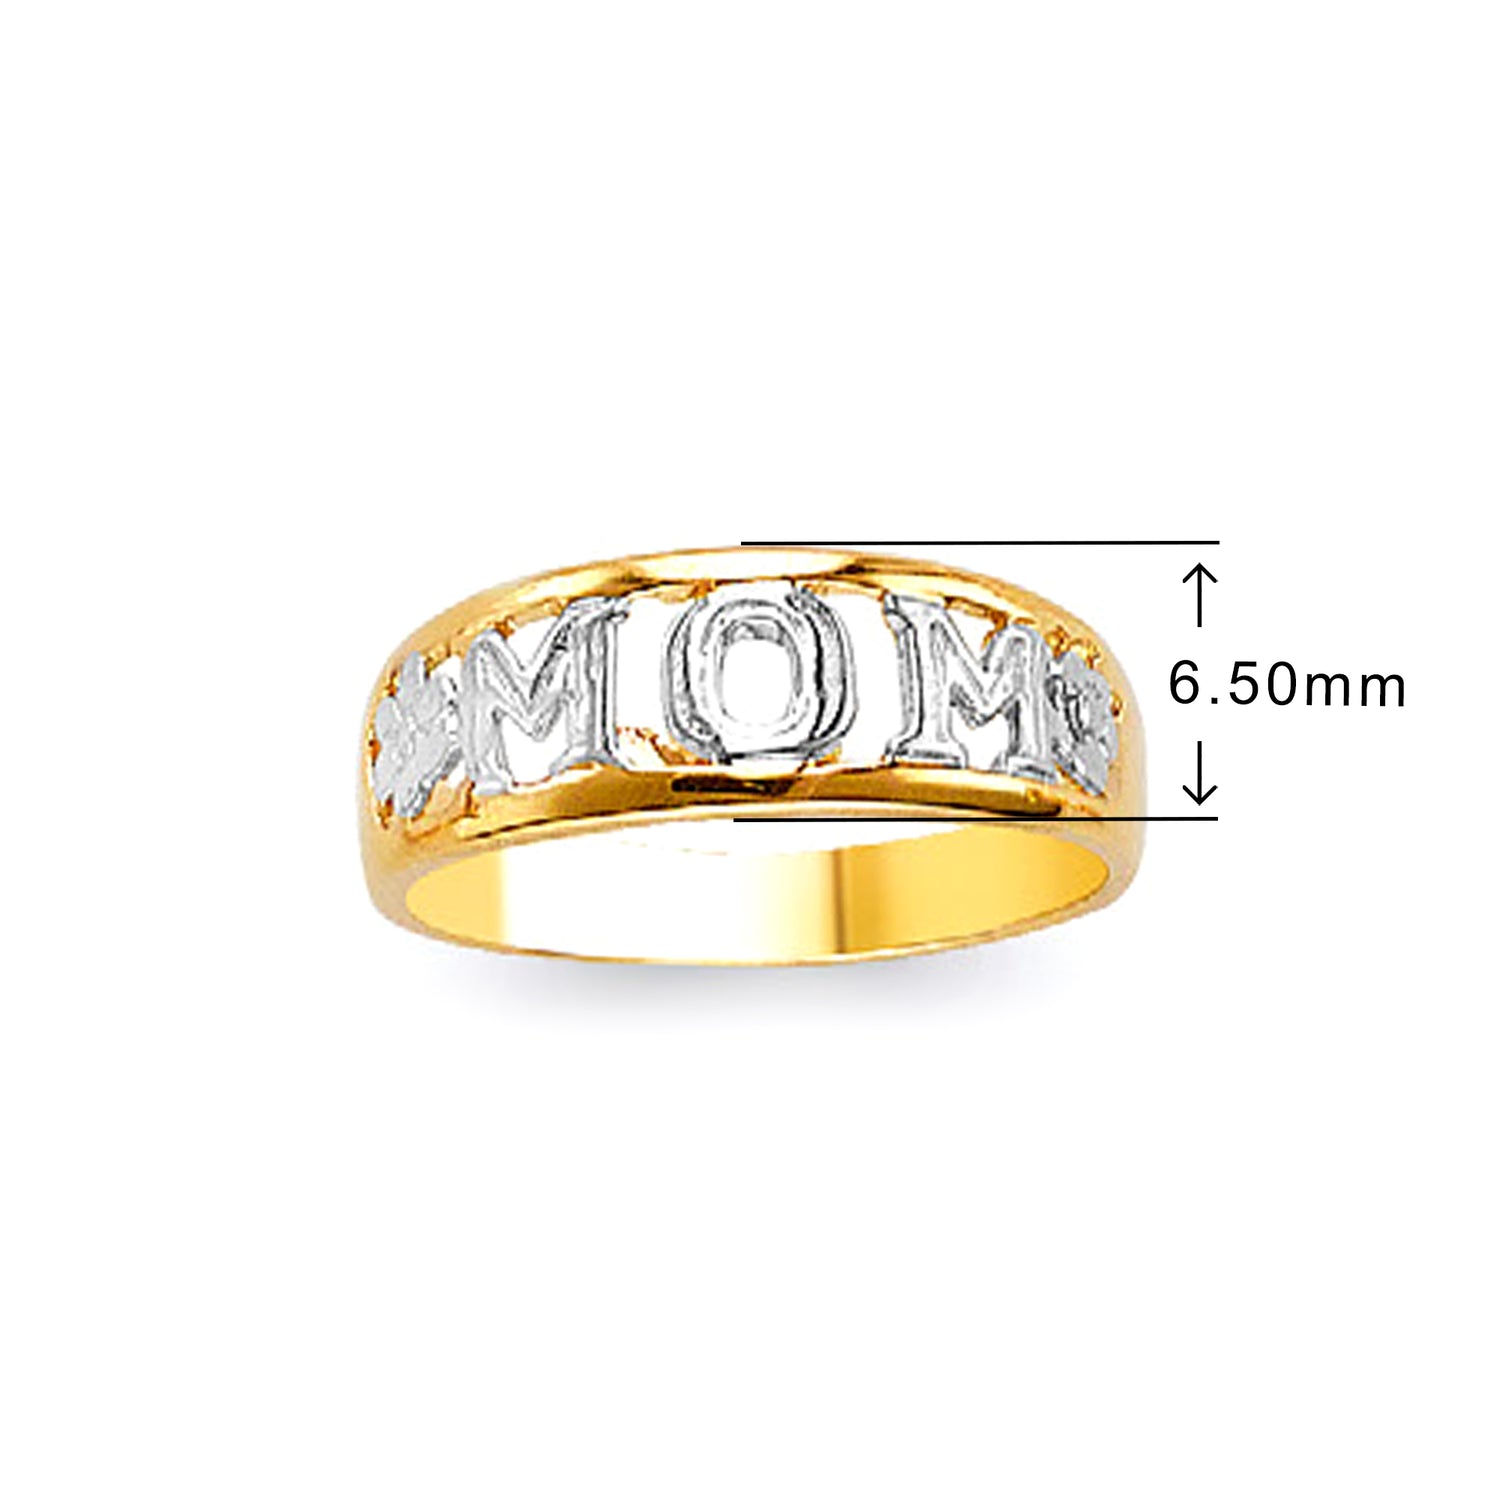 Luxurious Two-tone MOM Ring in Solid Gold with Measurement